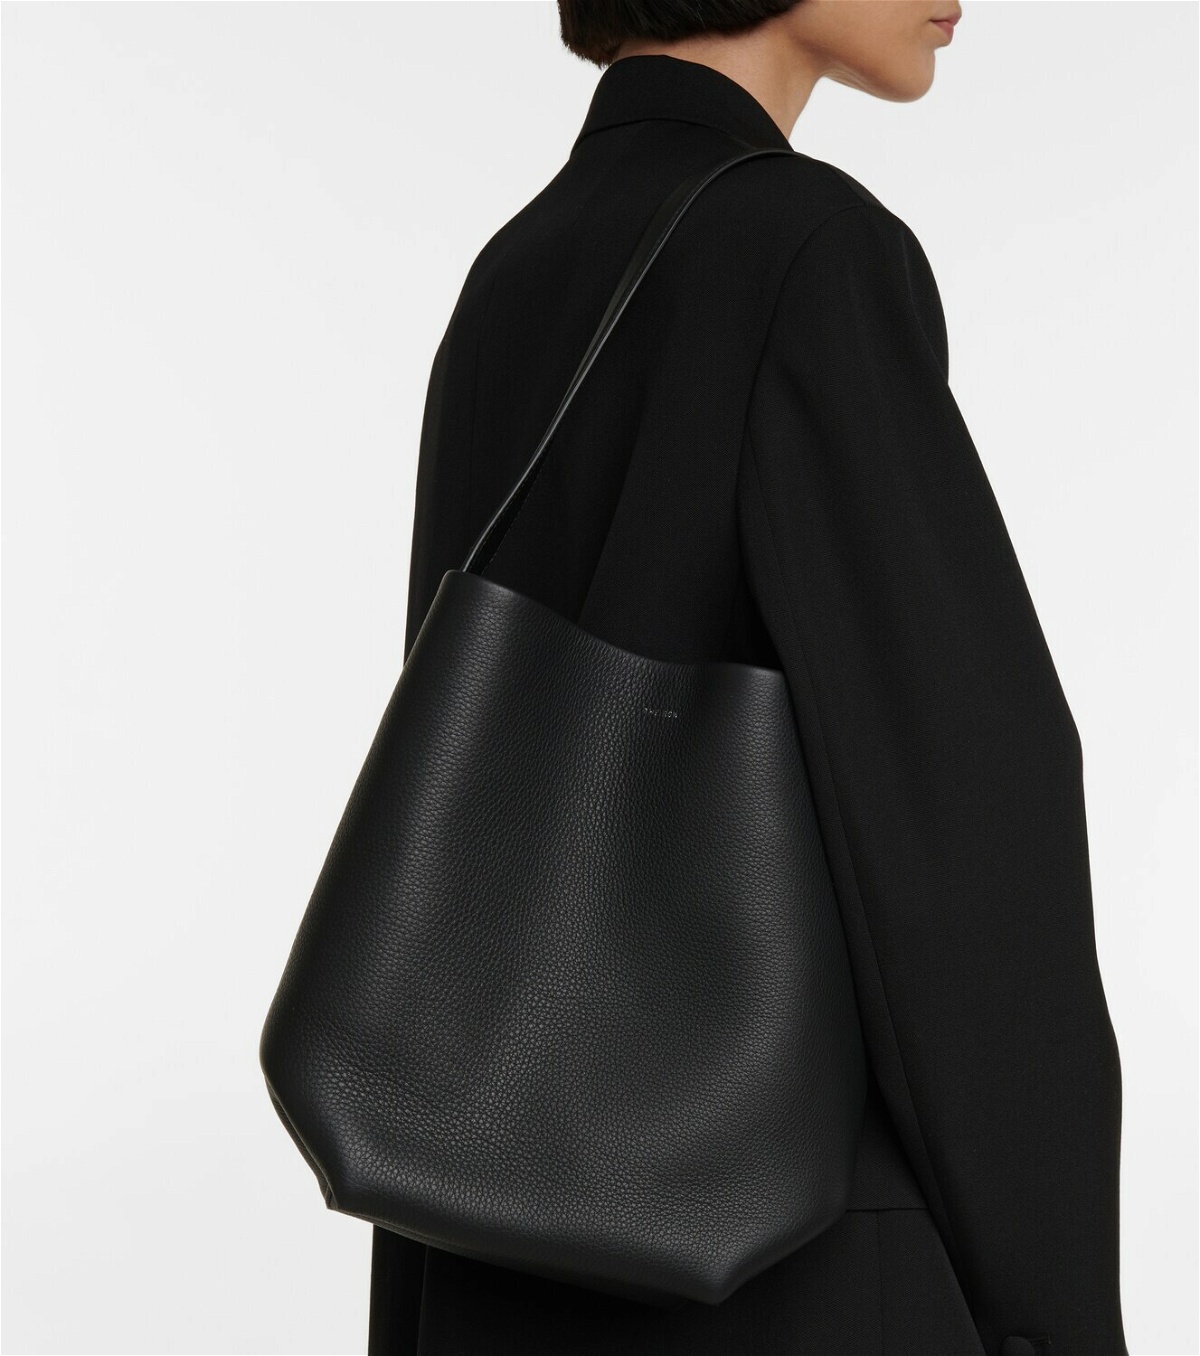 The Row N/S Canvas and Leather Park Tote in Black & Black